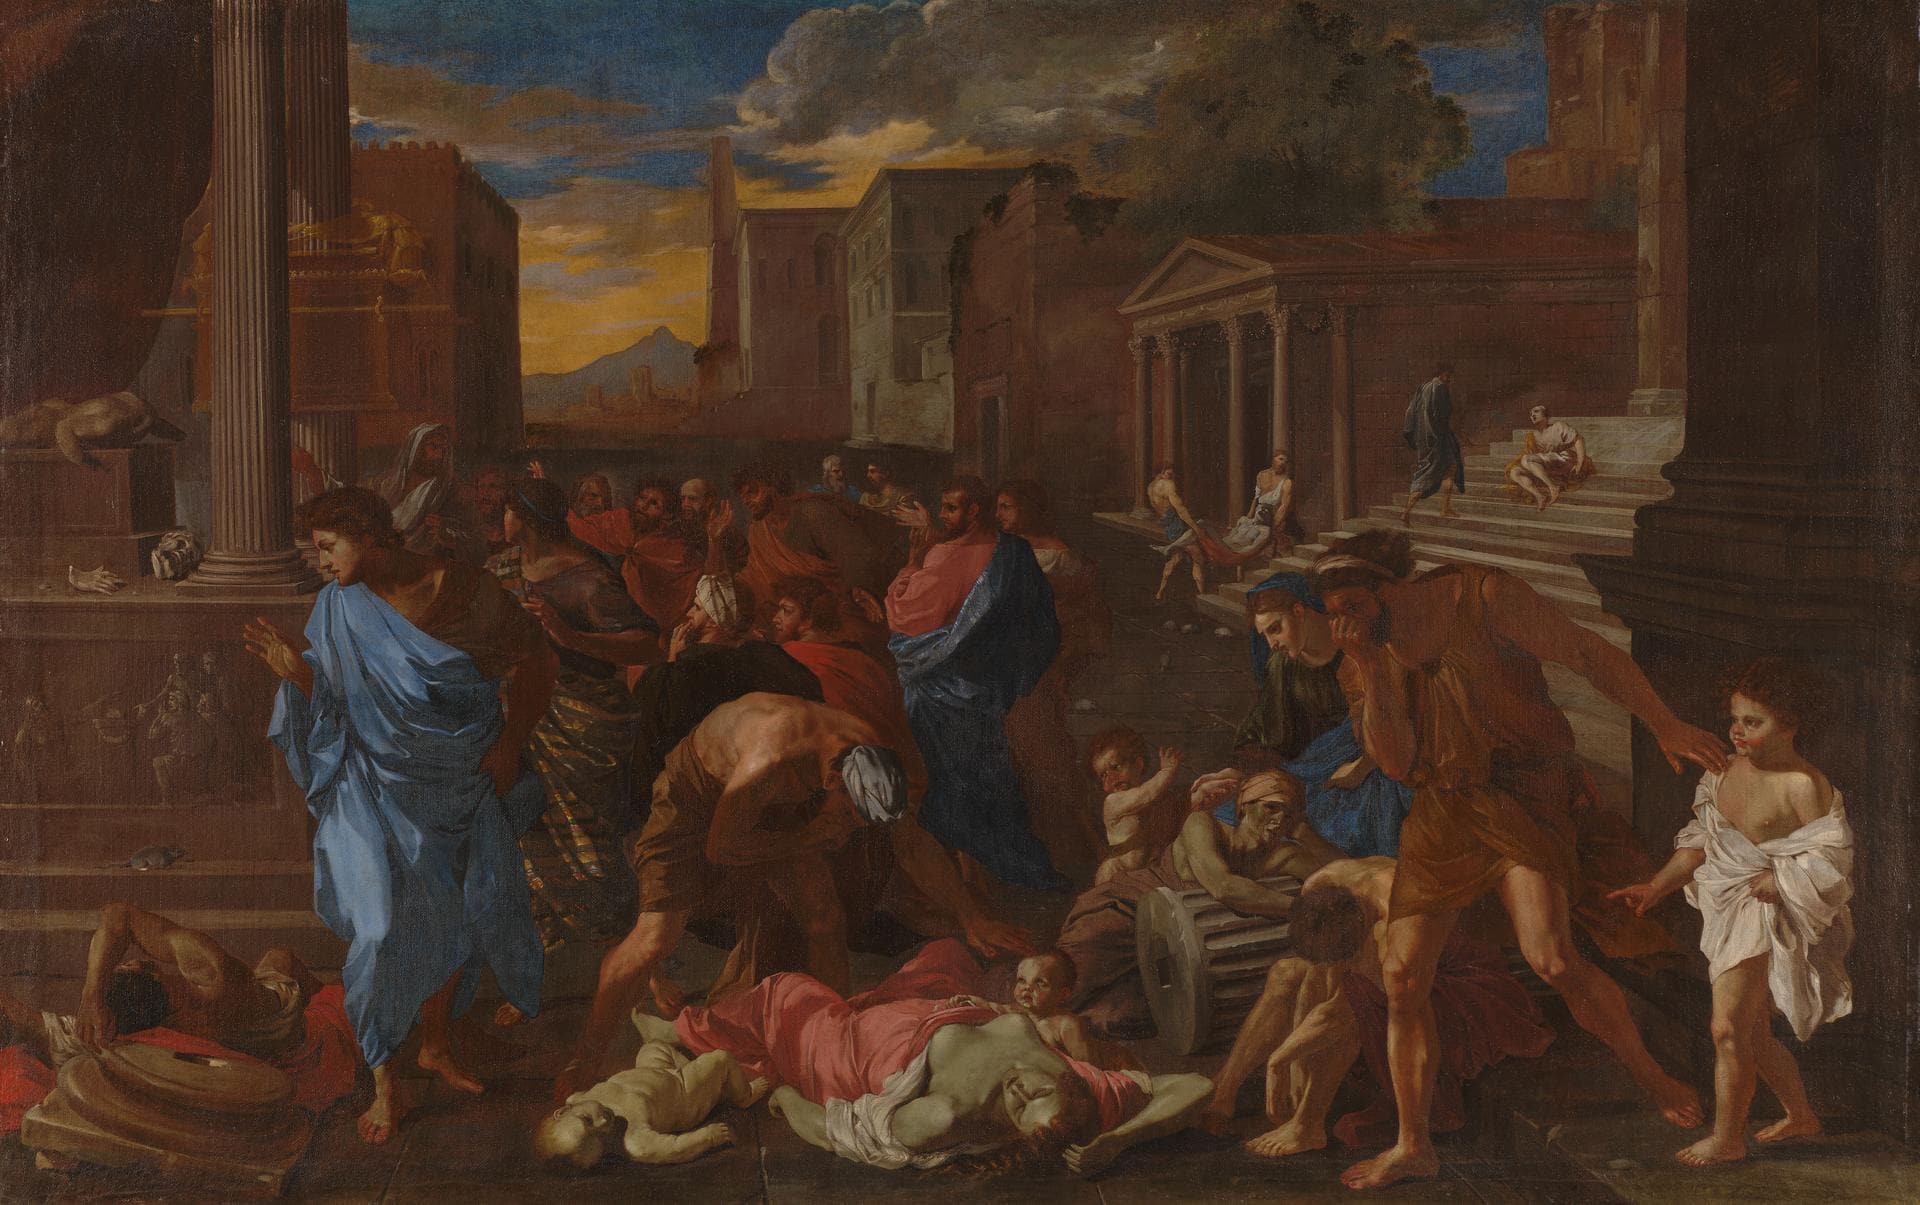 Angelo Caroselli, The Plague of Ashdod (after Poussin), 1631 ปัจจุบันอยู่ที่ The National Gallery, ลอนดอน, อังกฤษ https://www.nationalgallery.org.uk/paintings/angelo-caroselli-the-plague-at-ashdod-after-poussin